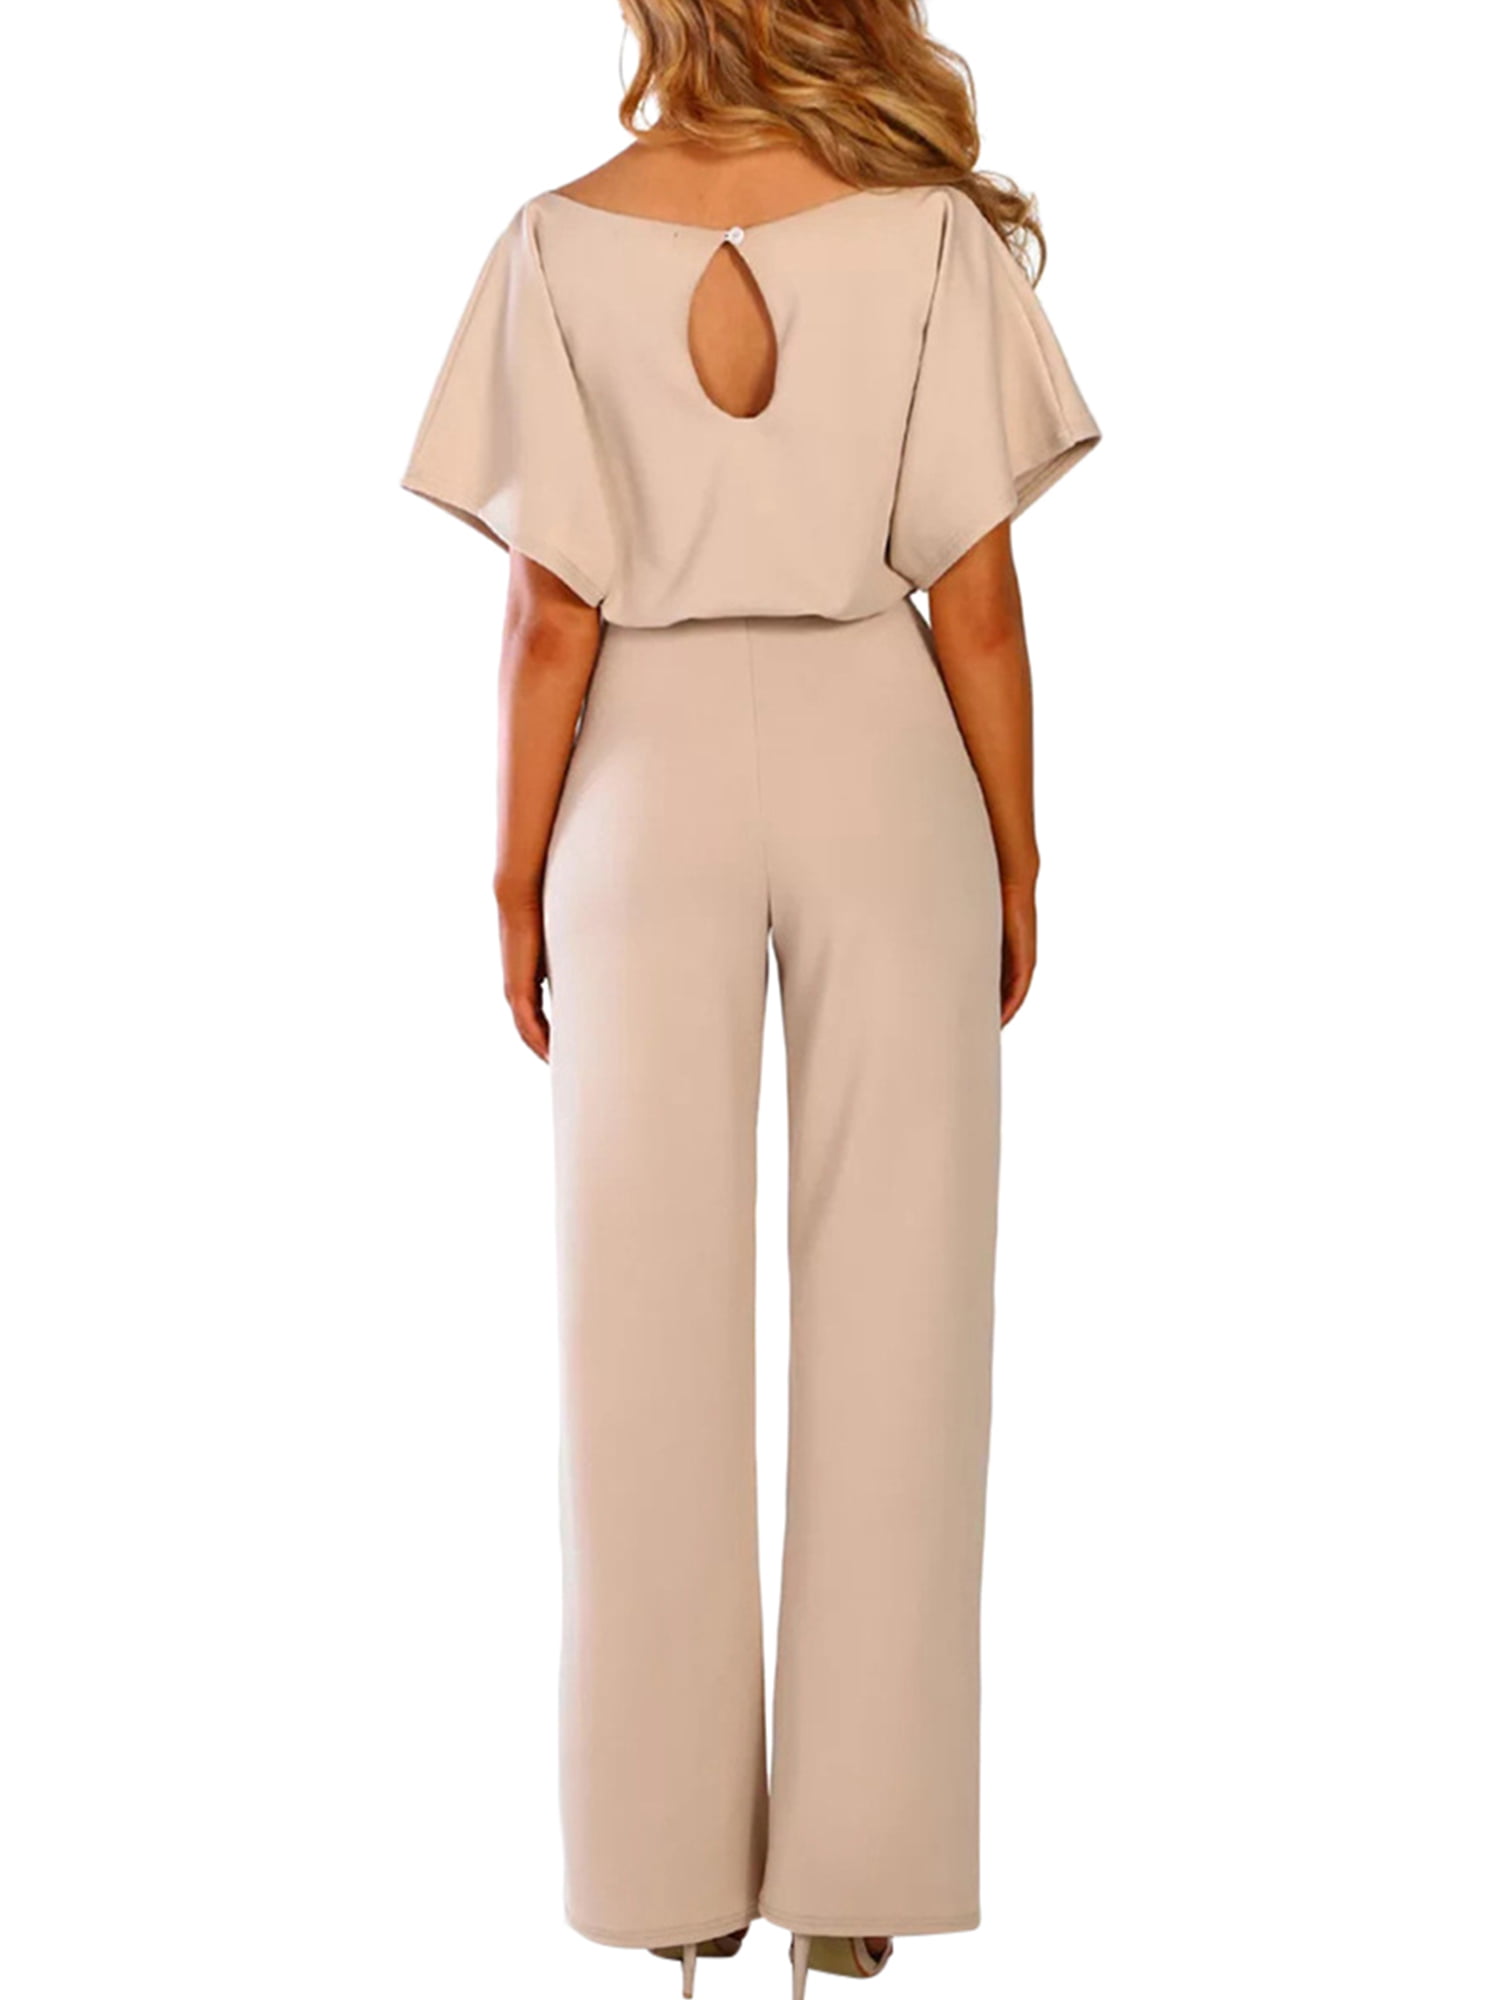 QIANS Womens Casual Short Sleeve Belted Jumpsuit Long Pants Back Keyhole Overall Romper Playsuit 